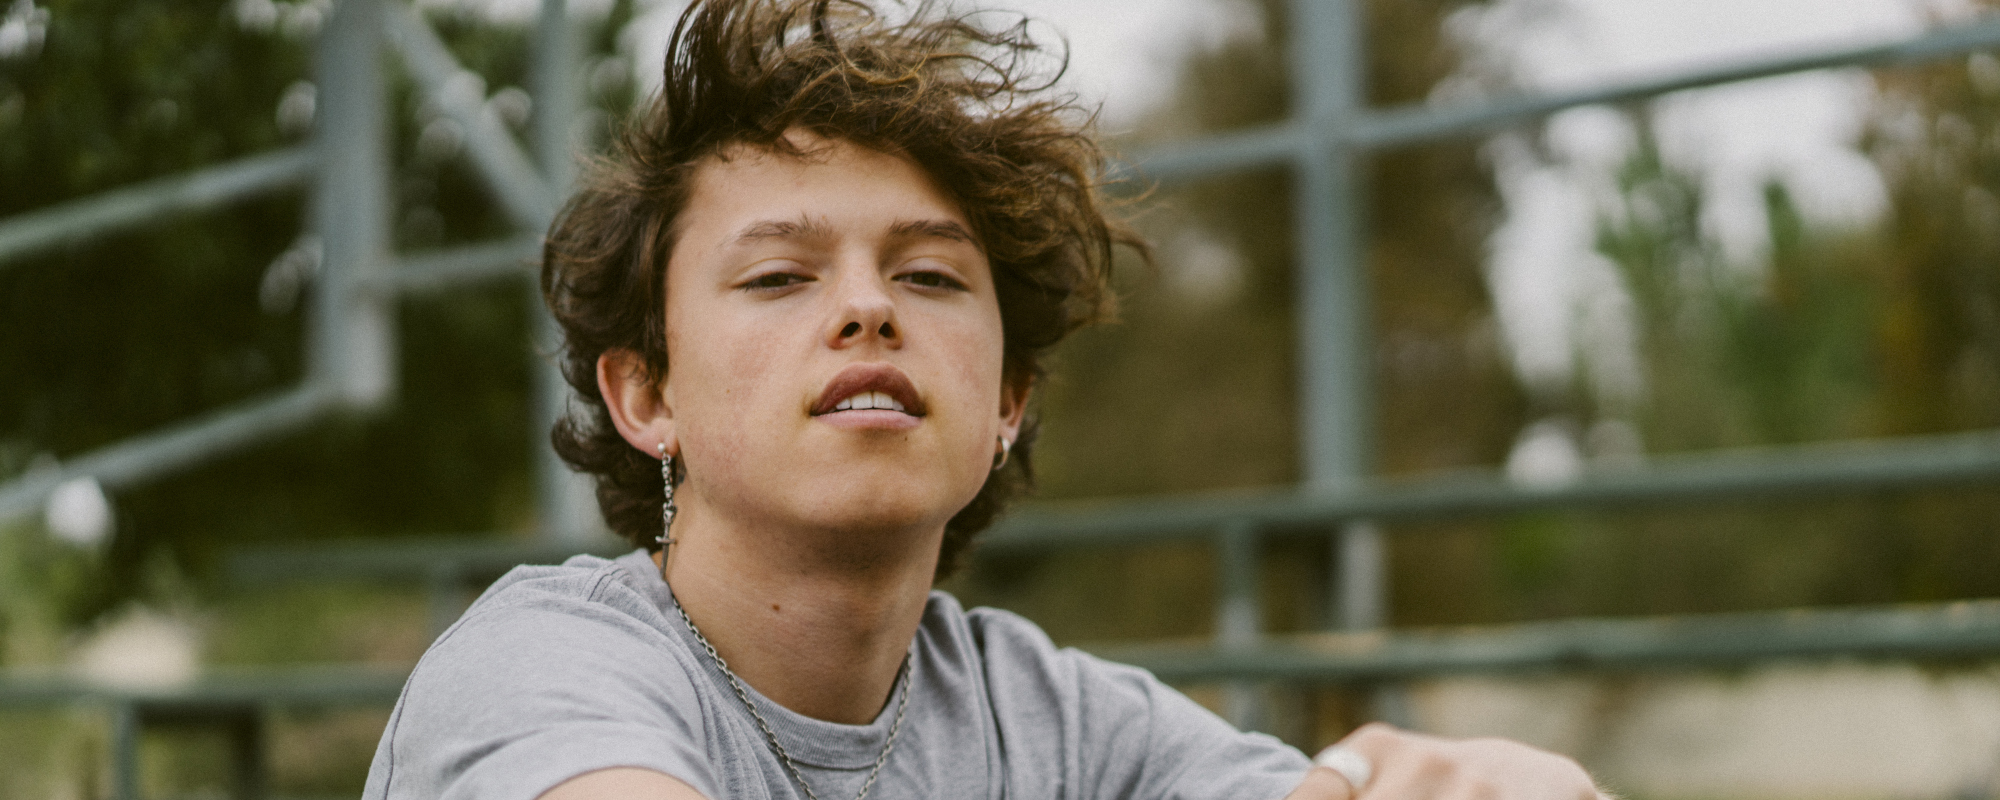 Jacob Sartorius is ‘Lost But Found’ on Authentic New EP with Relatable Lyricism